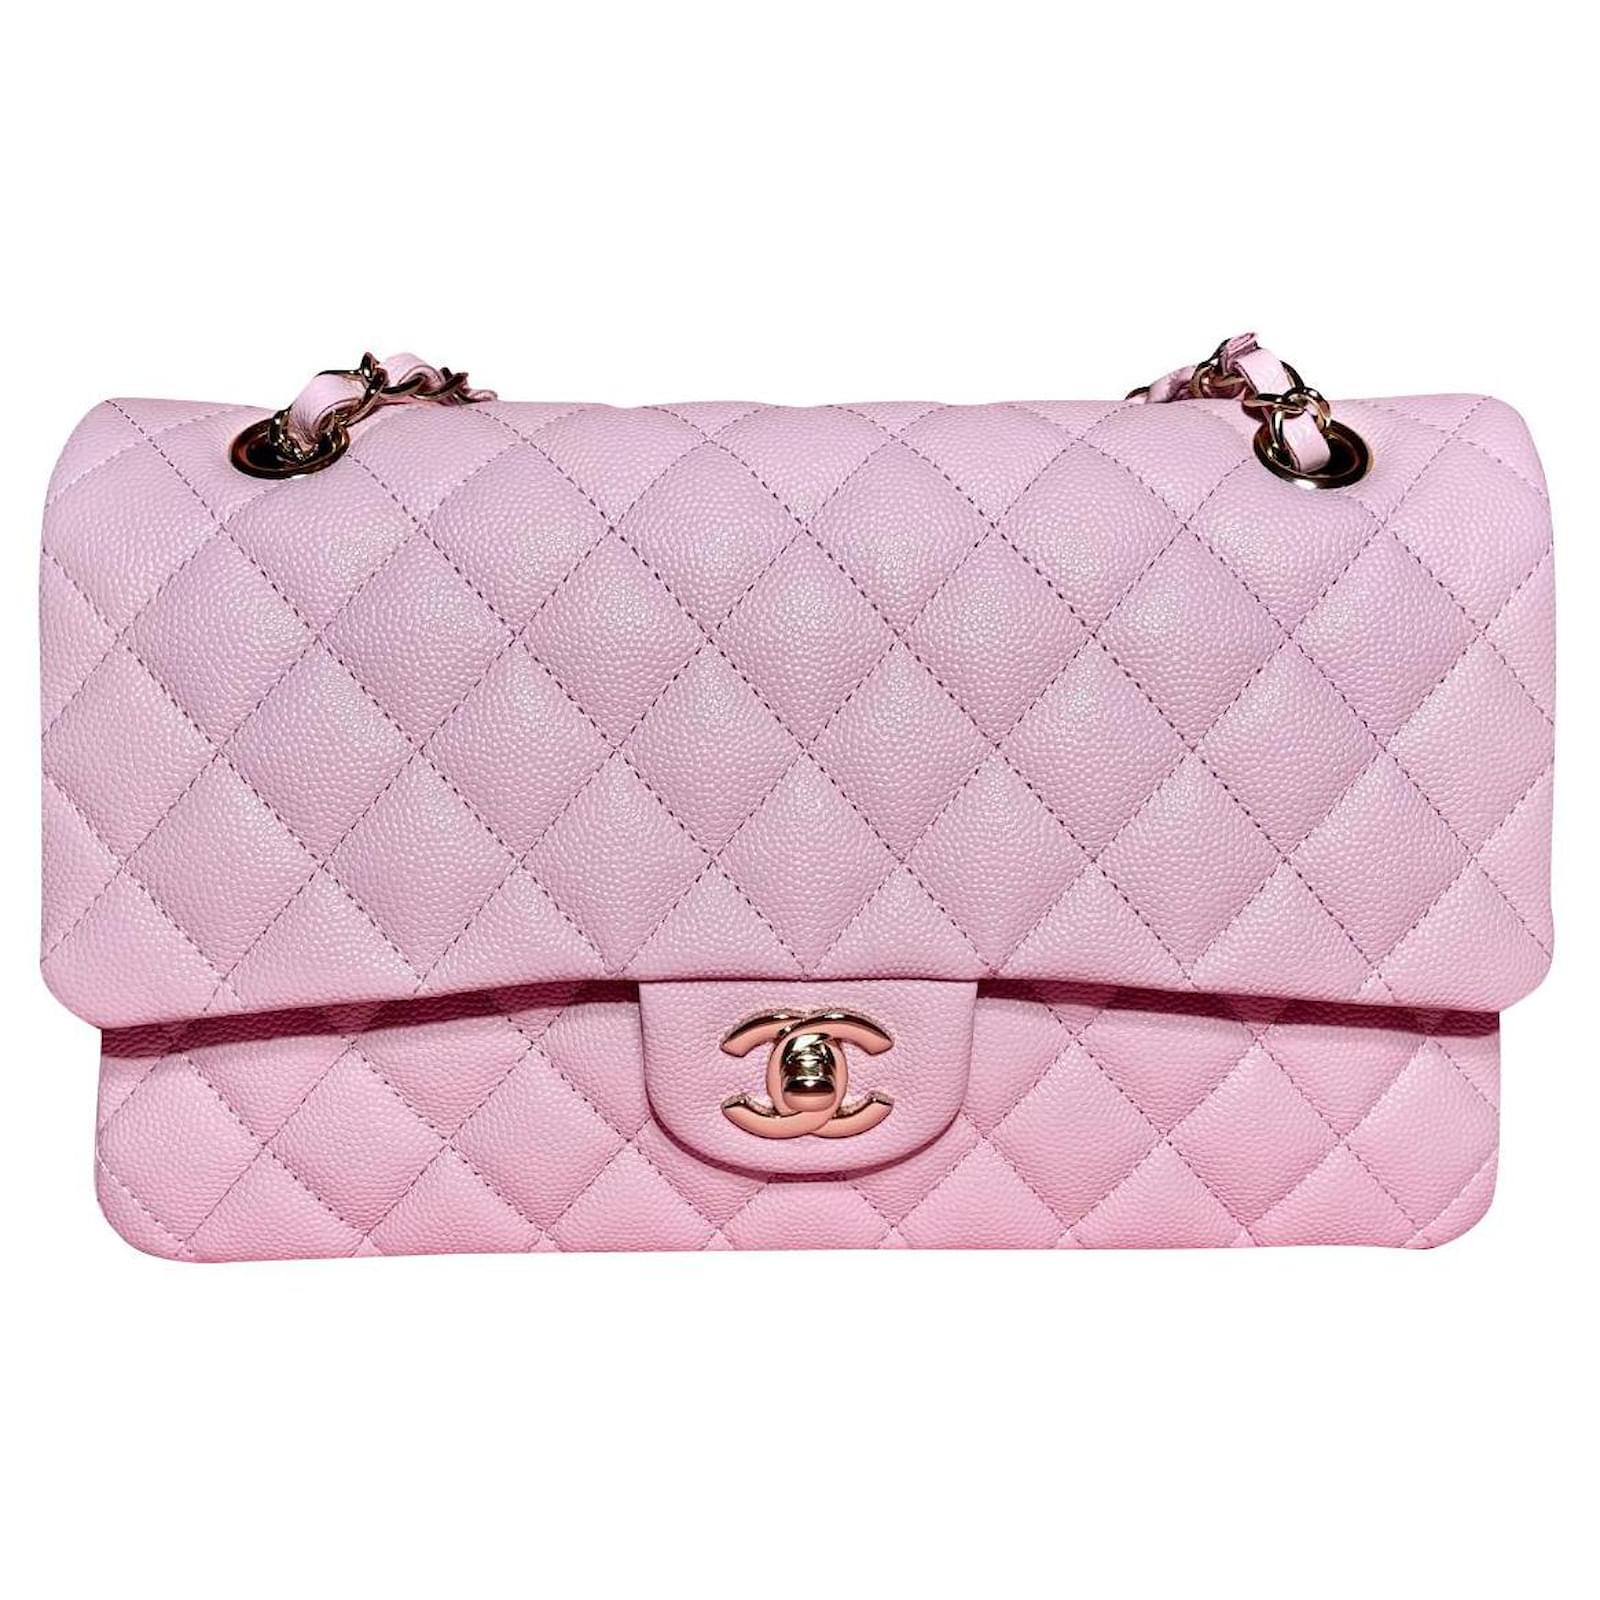 21S NC022 Chanel Classic lined Flap Caviar Leather Lilac Pink